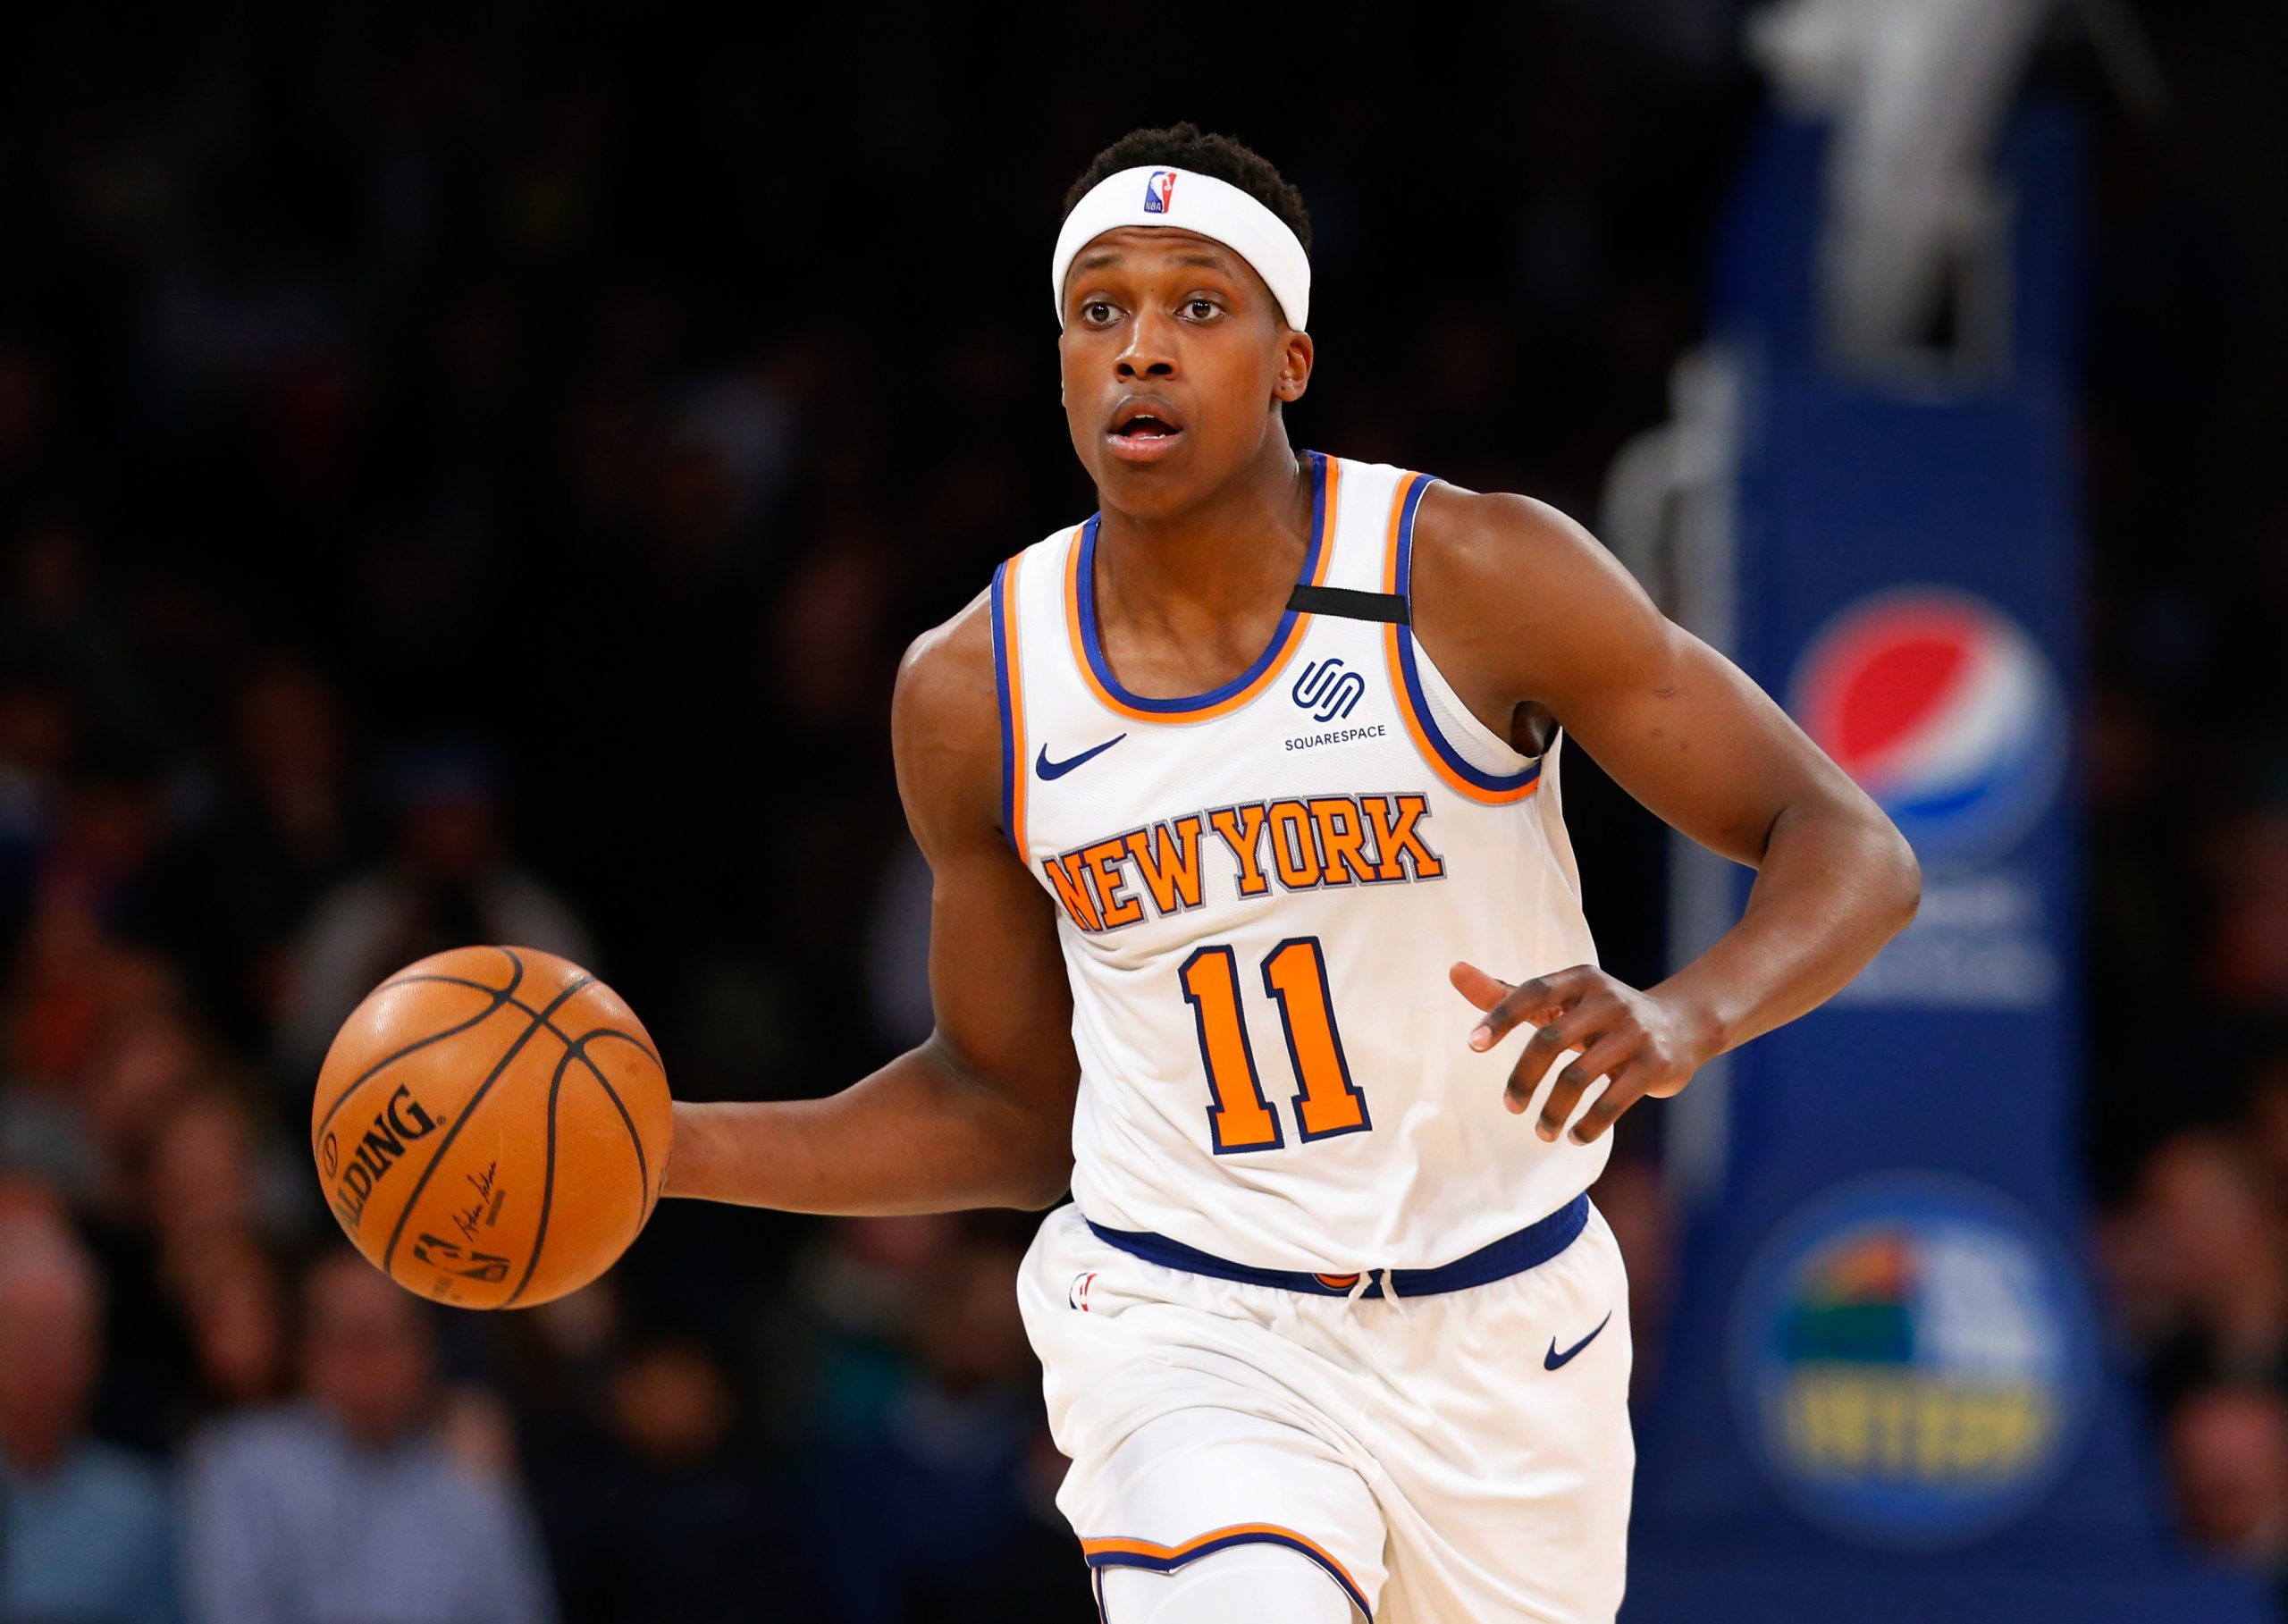 Parting With Frank Ntilikina Might Be Best for Both Parties